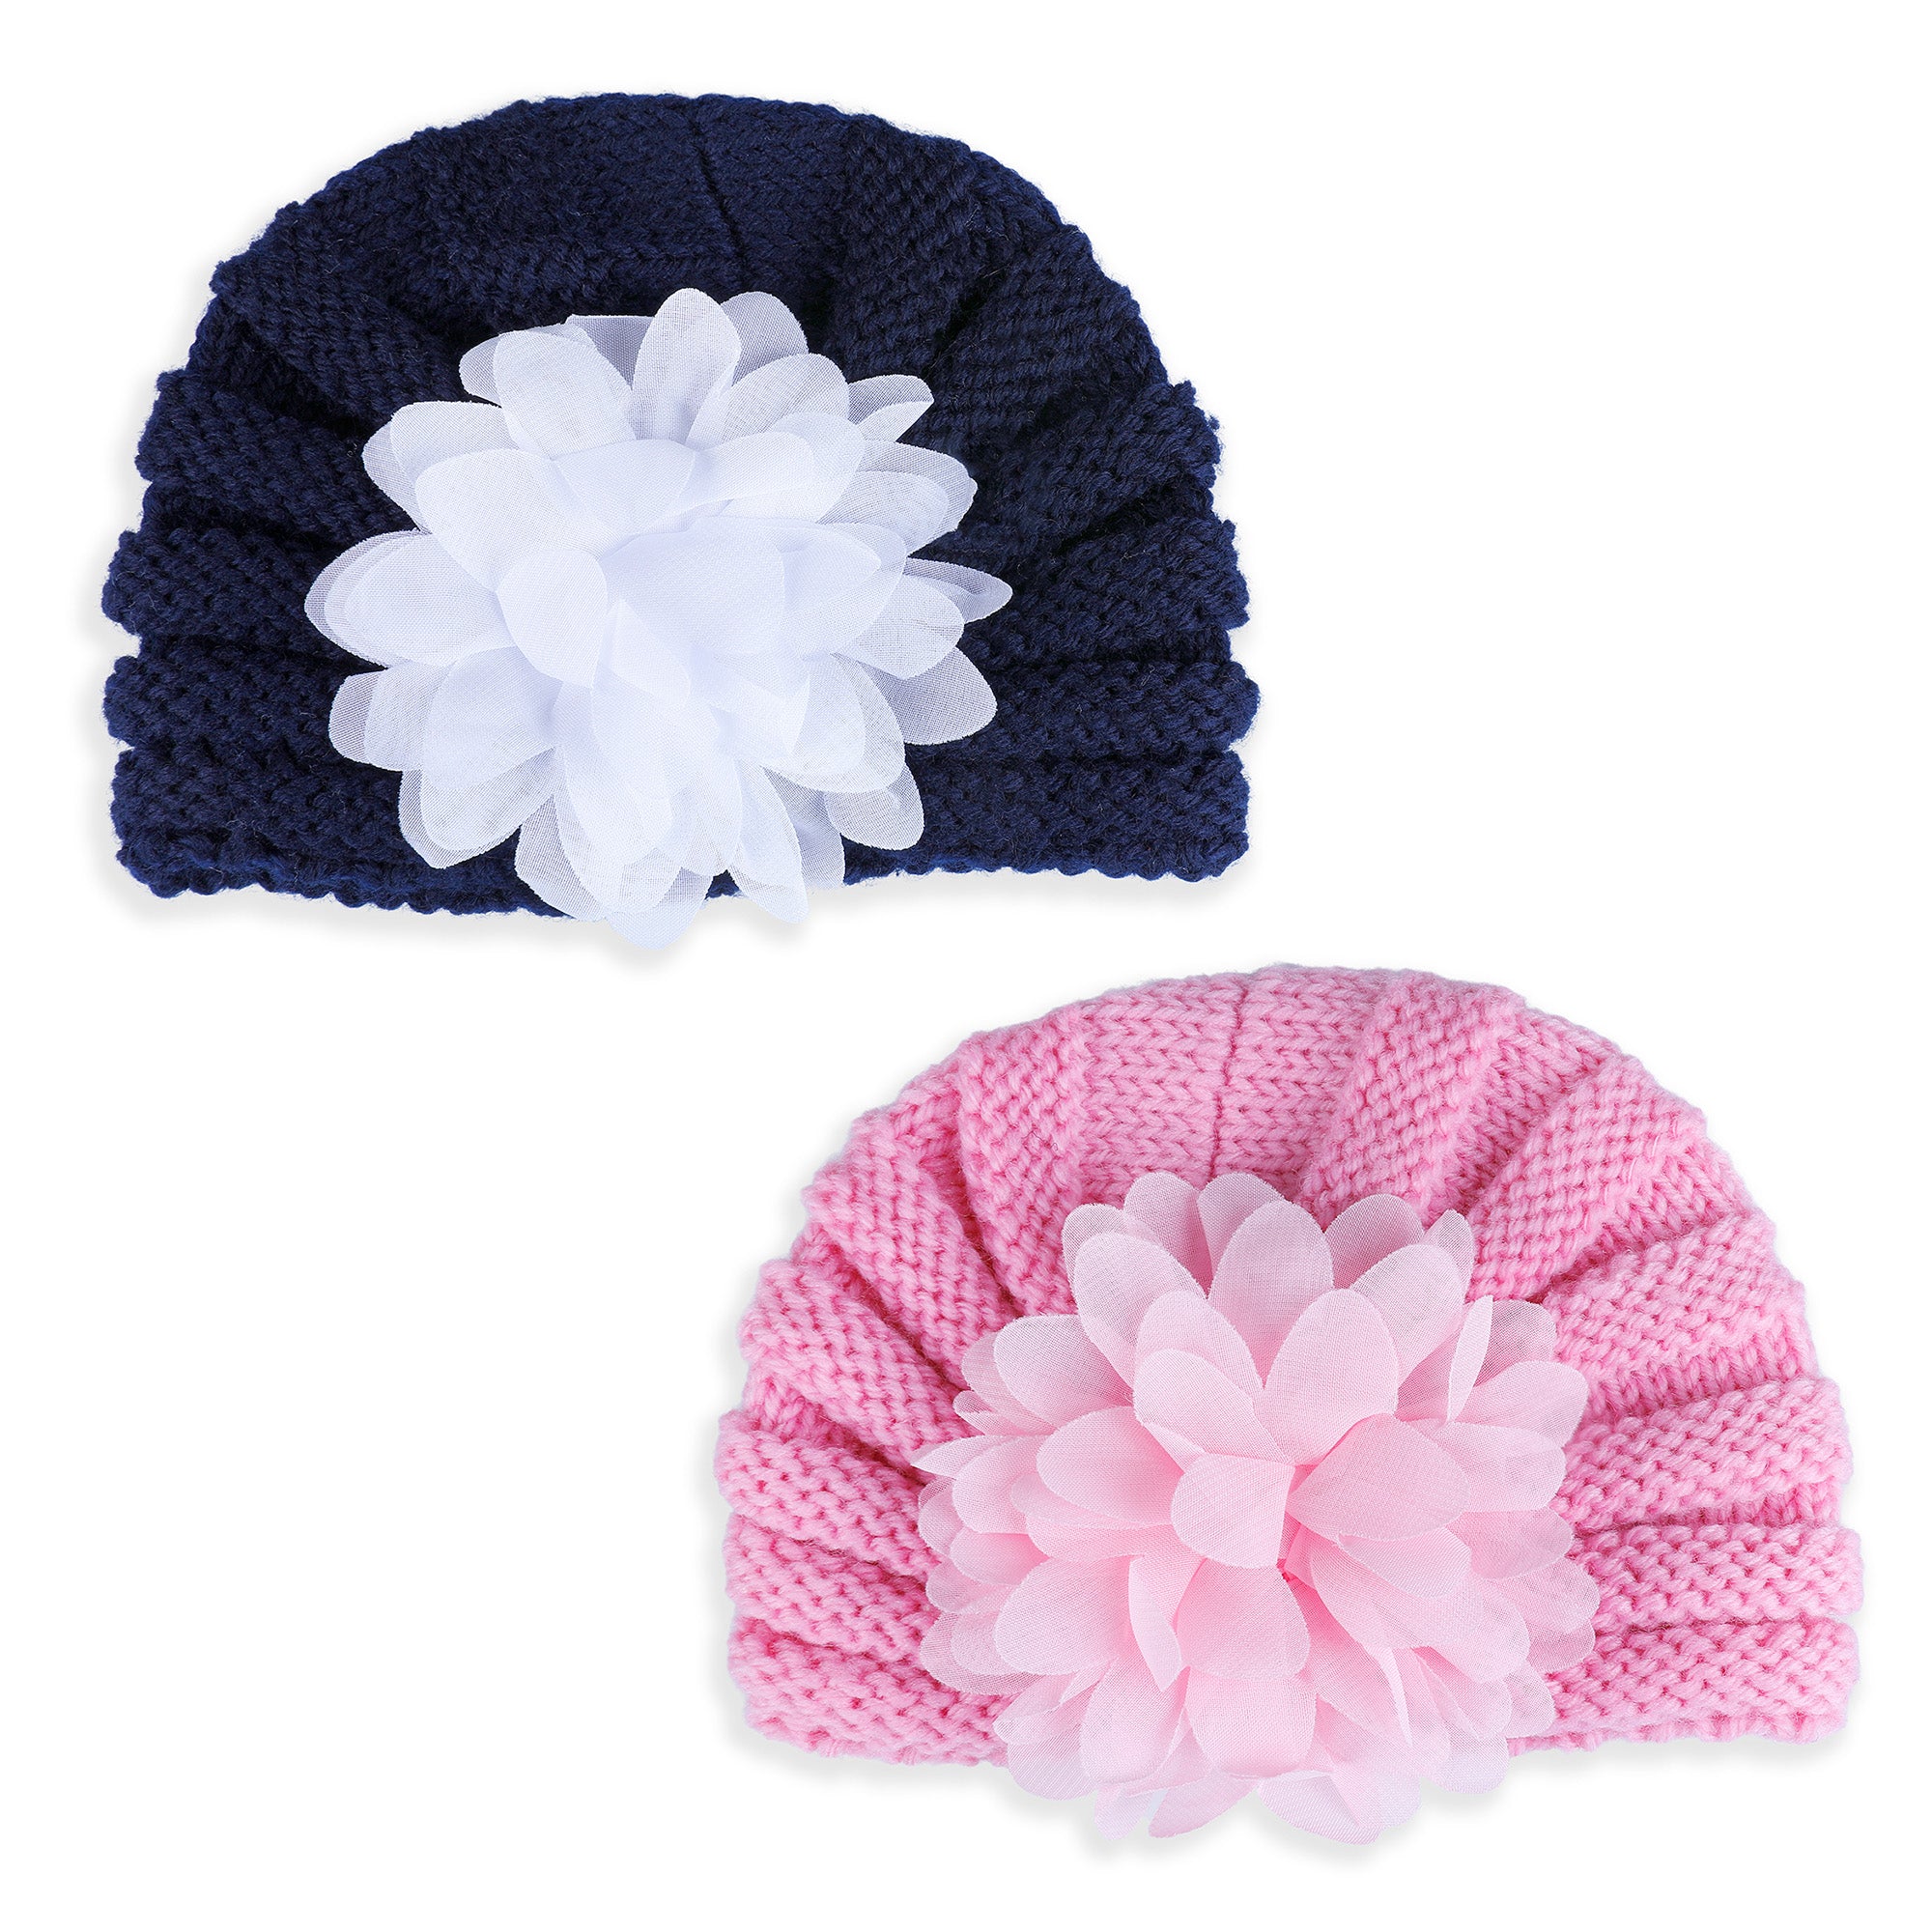 Baby Moo Floral Petals 2 Pack Turban Caps - Pink And Navy Blue - Baby Moo